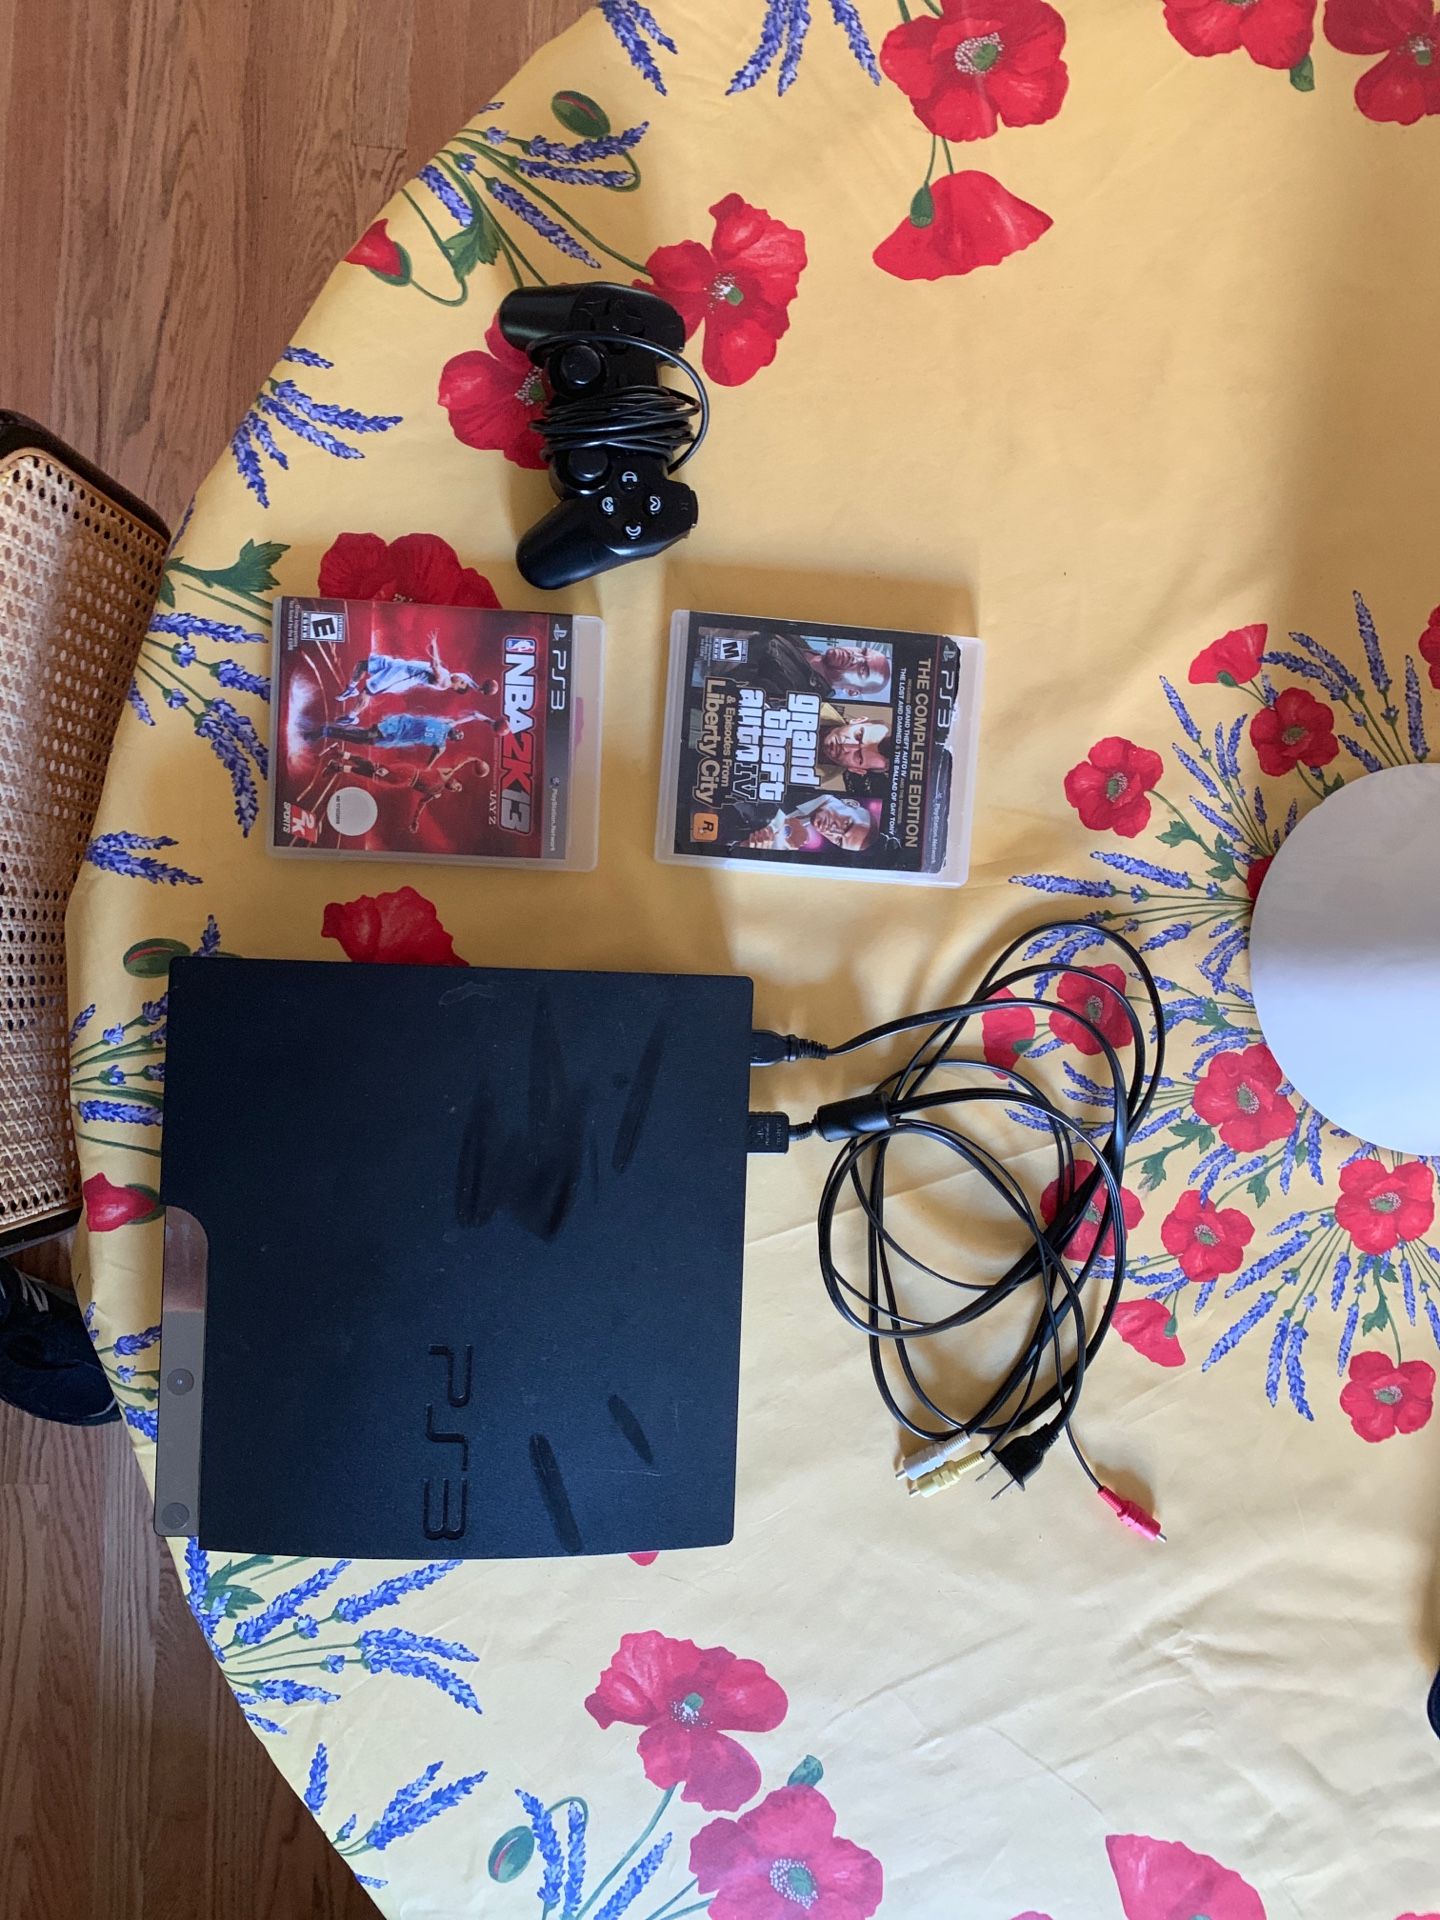 Ps3 Bundle (system, 2 games, chords, one wired controller)